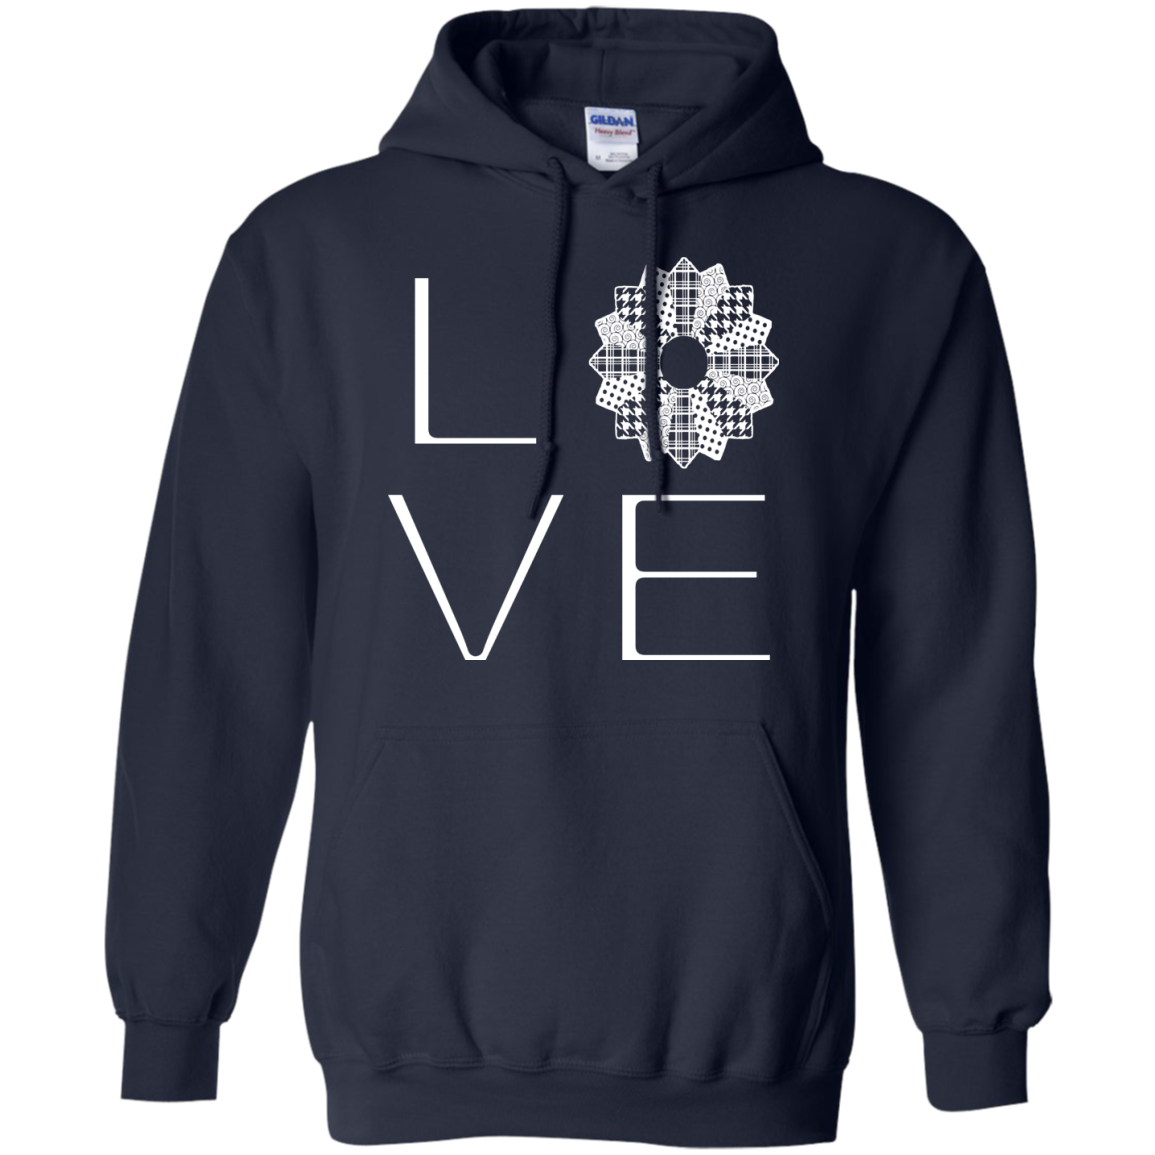 LOVE Quilting Pullover Hoodies - Crafter4Life - 3